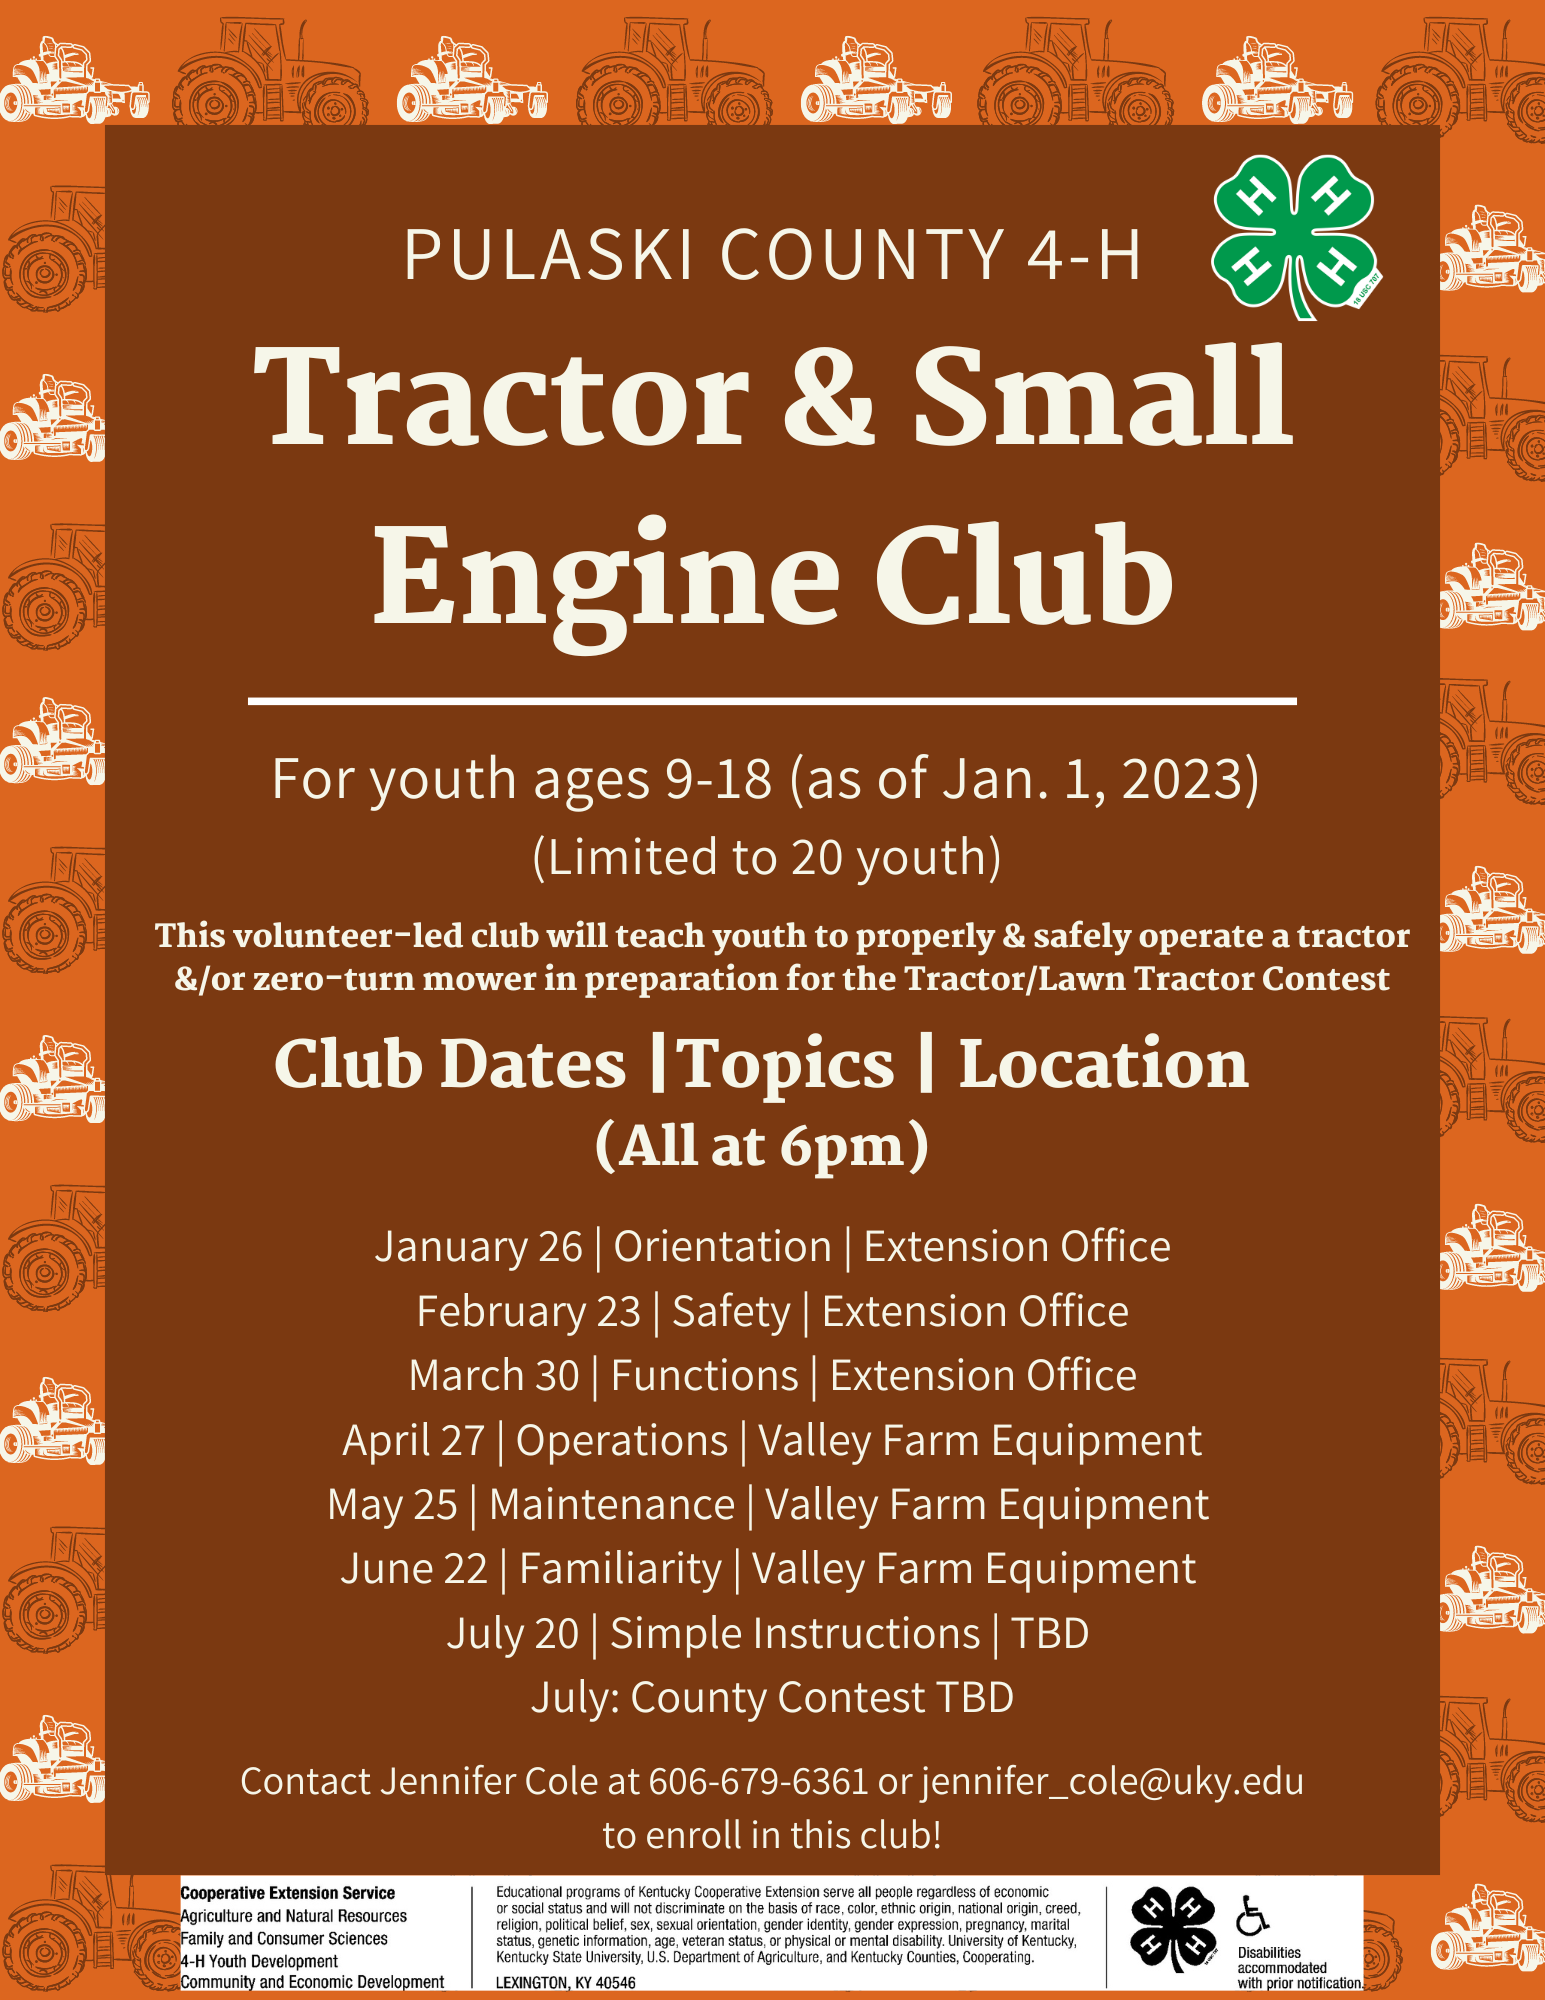 Tractor & Small Engine Club This volunteer-led club will teach youth to properly & safely operate a tractor &/or zero-turn mower in preparation for the Tractor/Lawn Tractor Contest Club Dates |Topics | Location (All at 6pm) January 26 | Orientation | Extension Office February 23 | Safety | Extension Office March 30 | Functions | Extension Office April 27 | Operations | Valley Farm Equipment May 25 | Maintenance | Valley Farm Equipment  June 22 | Familiarity | Valley Farm Equipment  July 20 | Simple Instruct